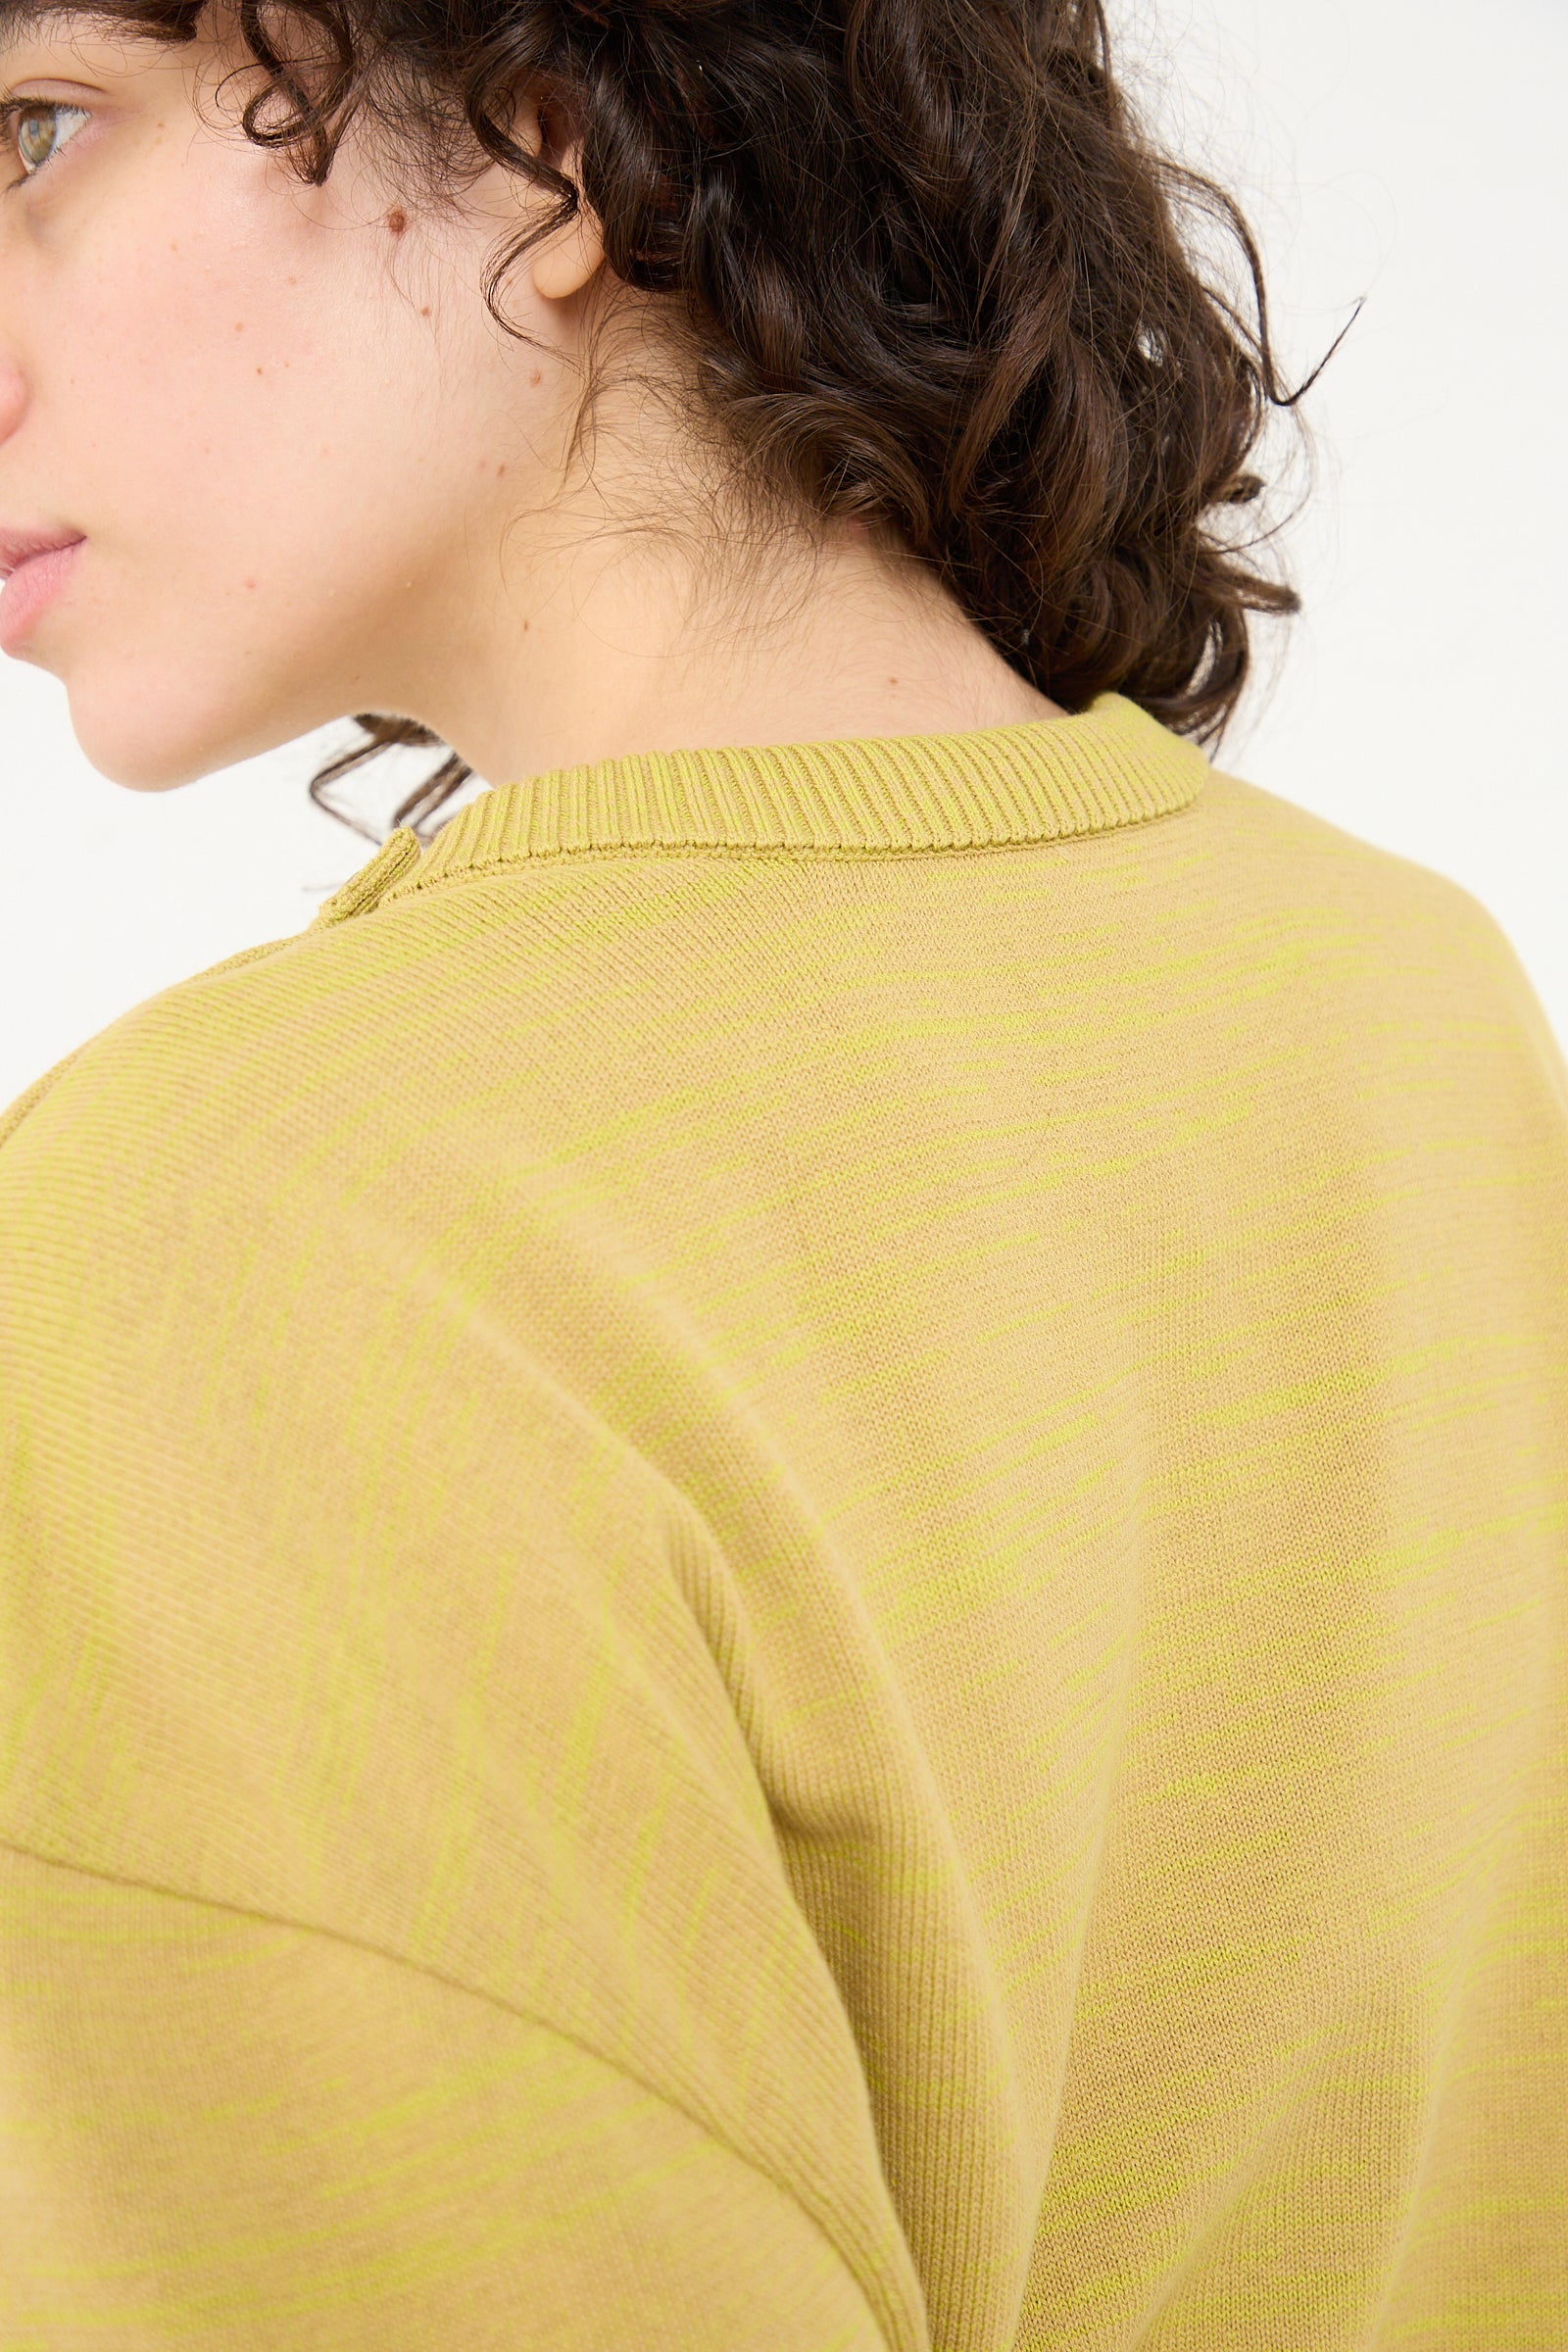 The back of a woman, slightly covered by her Veronique Leroy Cotton Boxy Sweater in Curry.